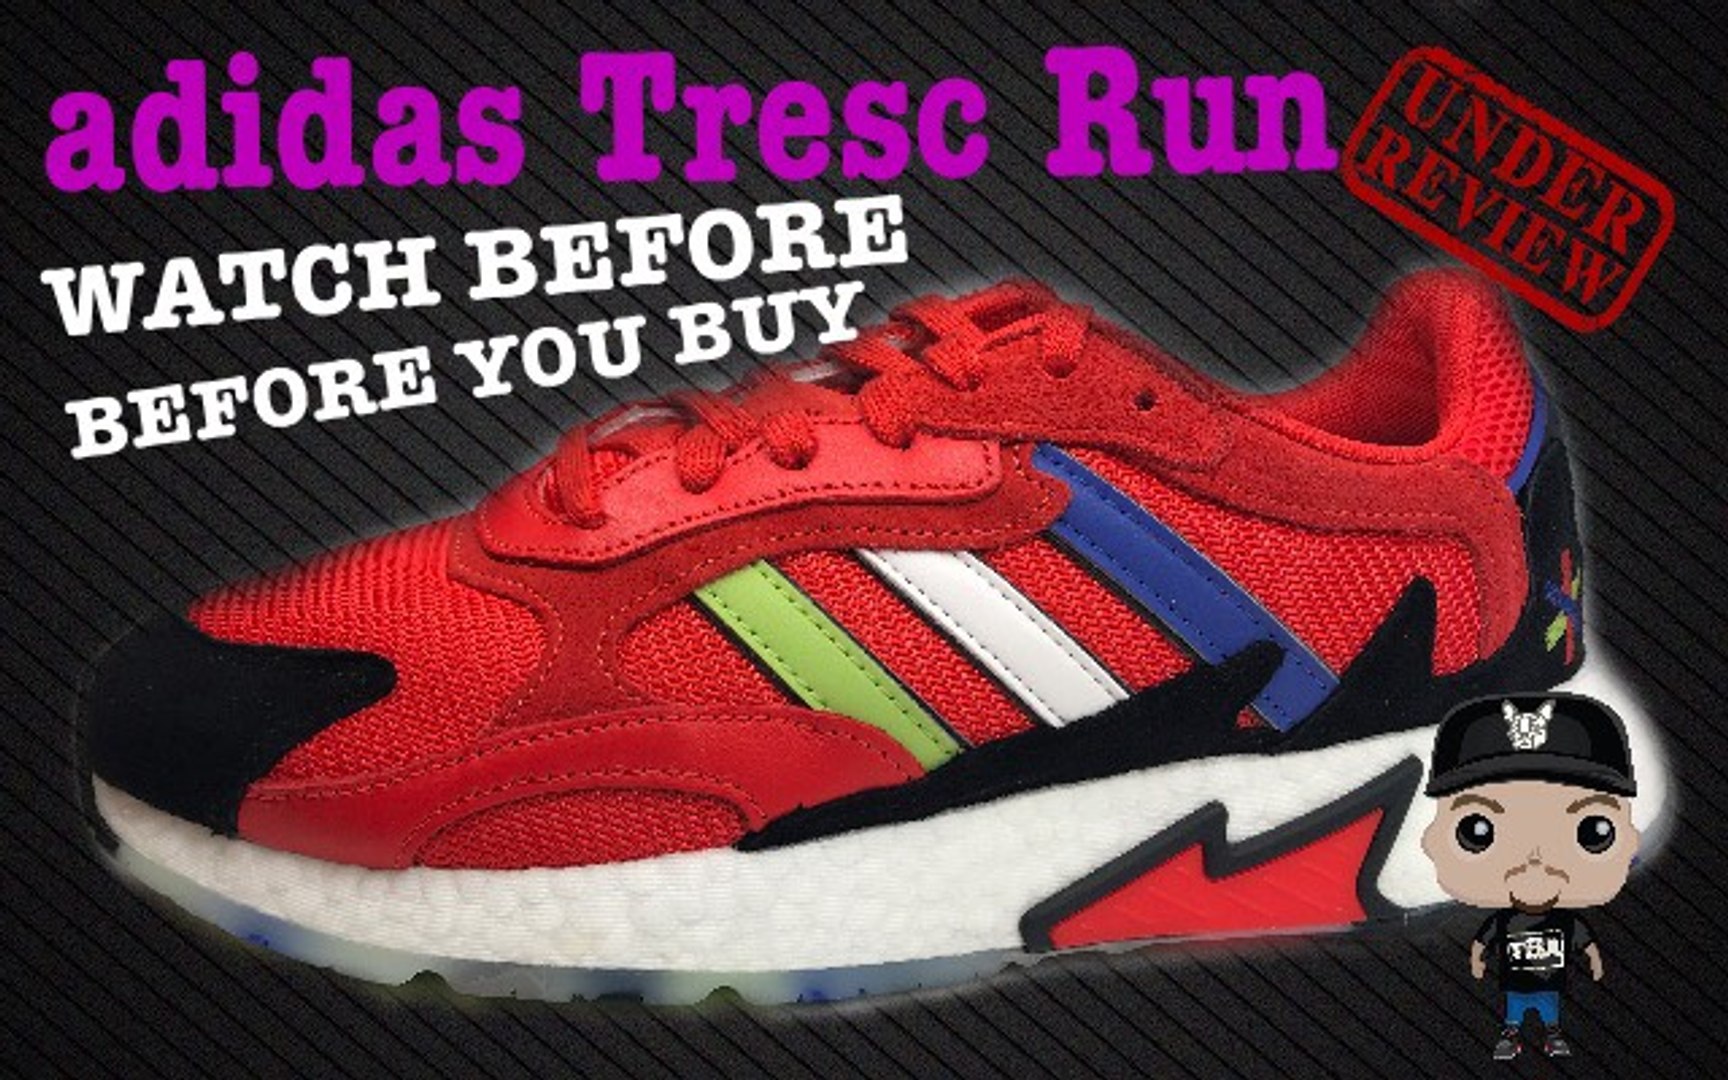 adidas Asterisk Collective Tresc Run Kid Cudi Shoe Detailed Review - video  Dailymotion